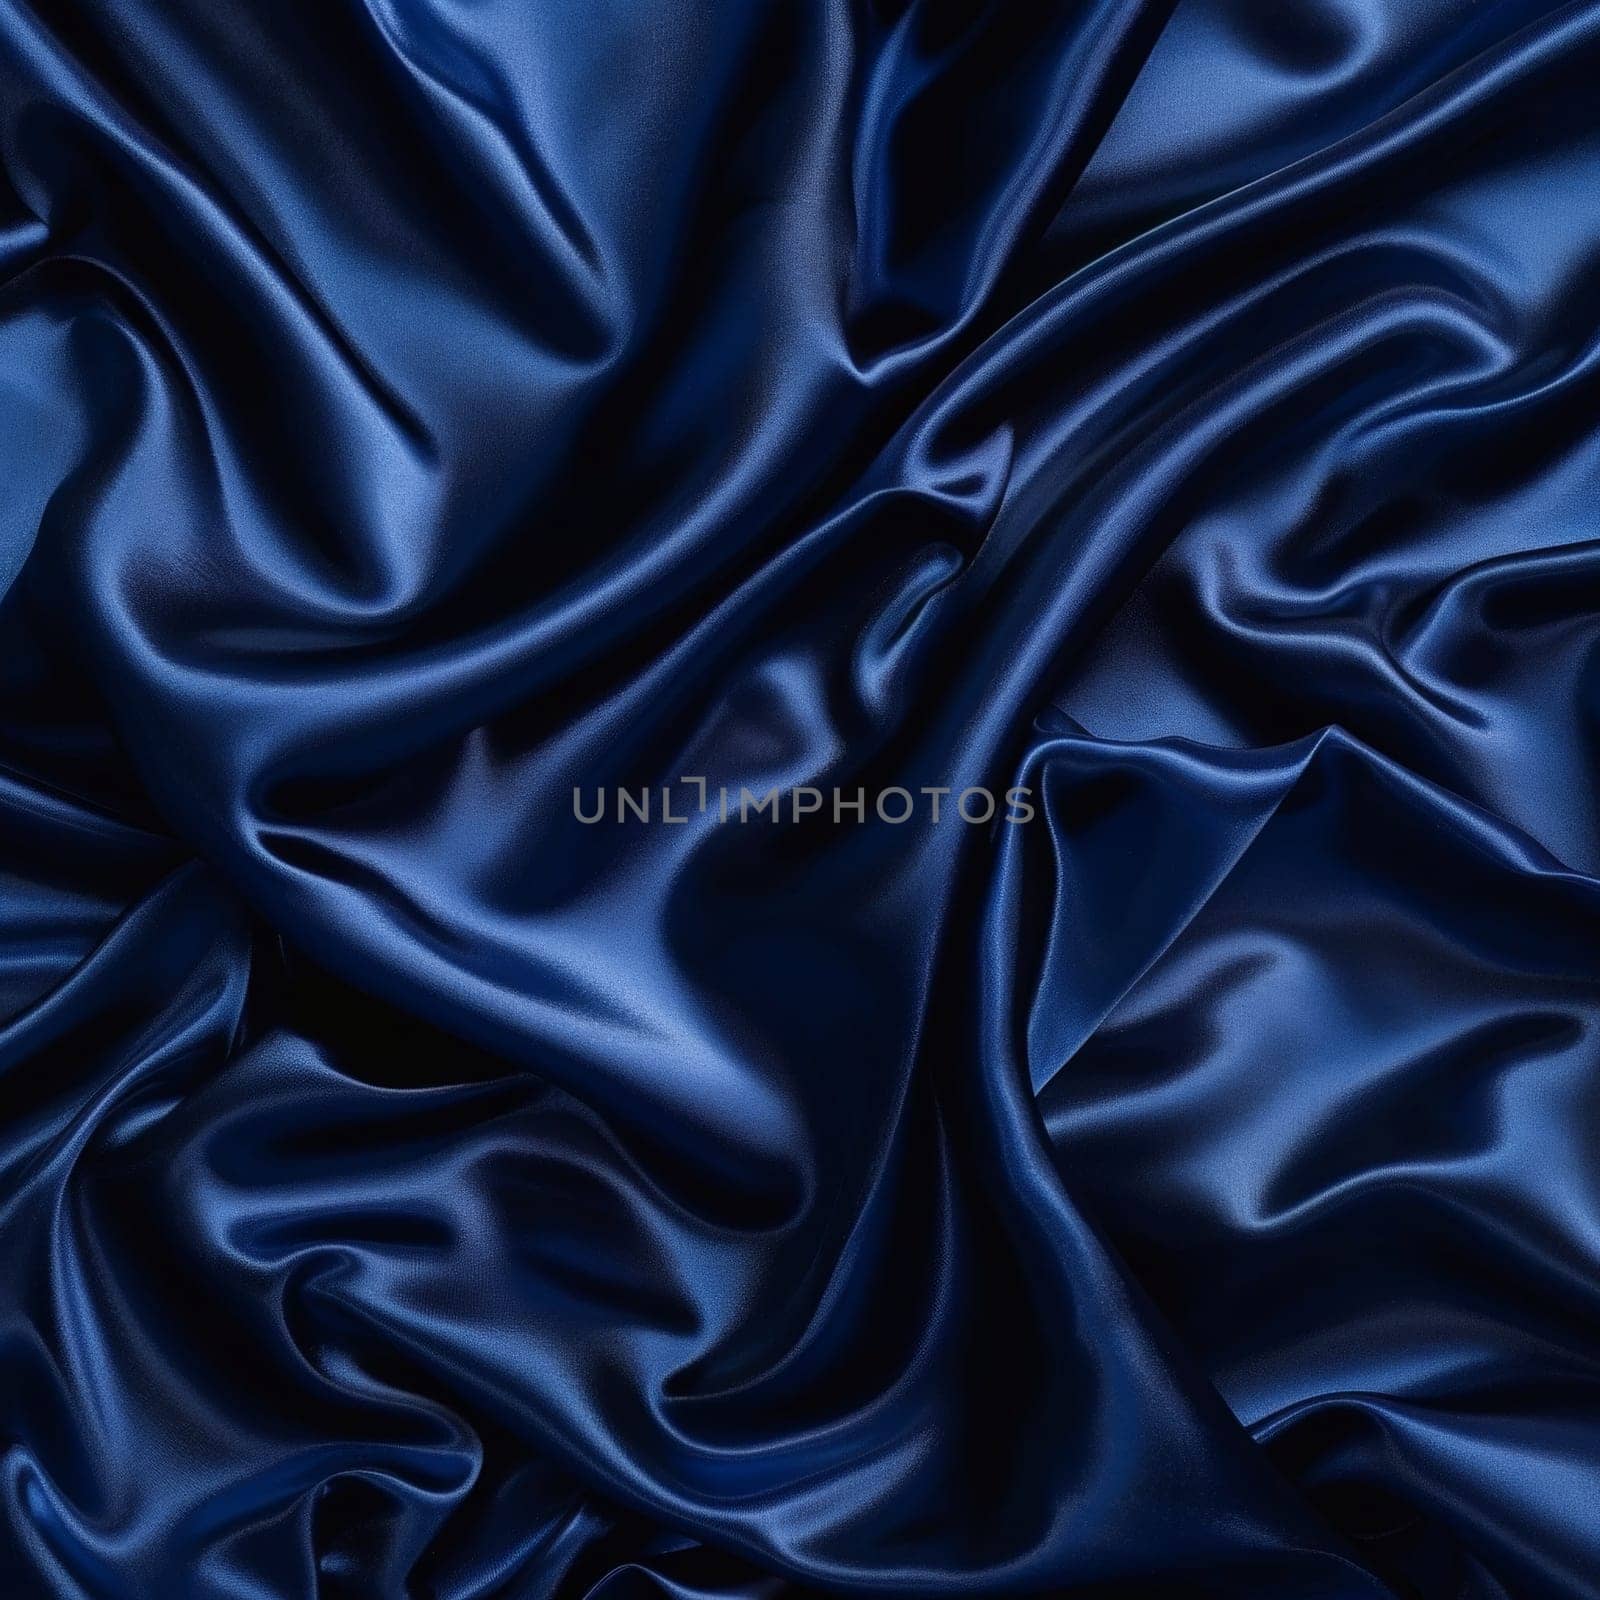 Billowing waves of indigo blue fabric have a rich, velvety texture that evokes a sense of luxury and opulence